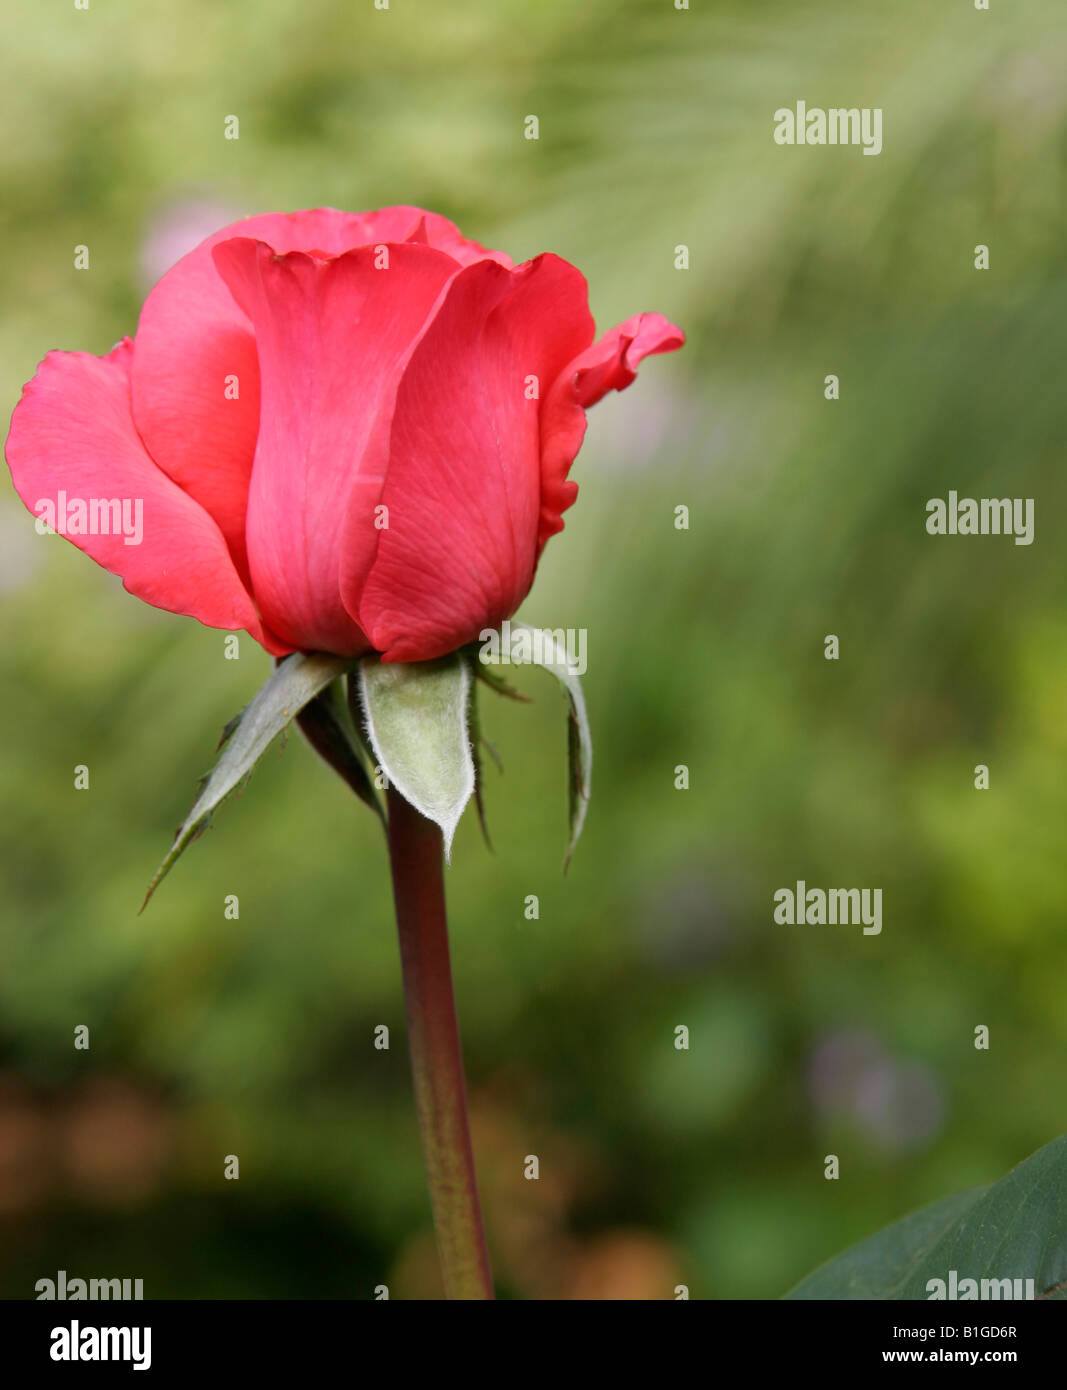 A single rose blossom in a flower garden Stock Photo